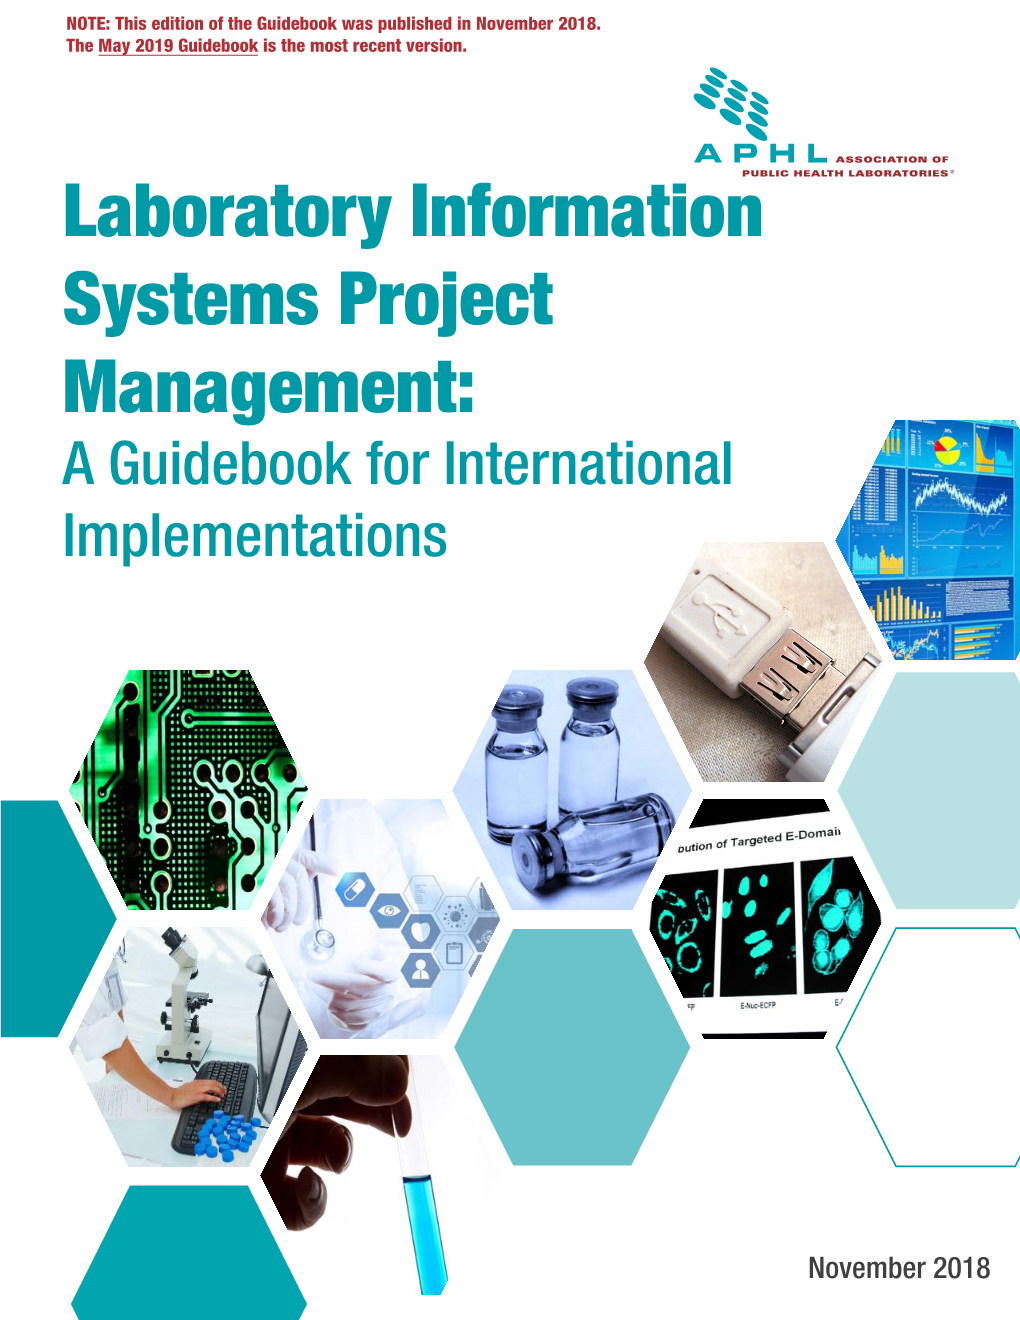 Laboratory Information Systems Project Management: a Guidebook for International Implementations